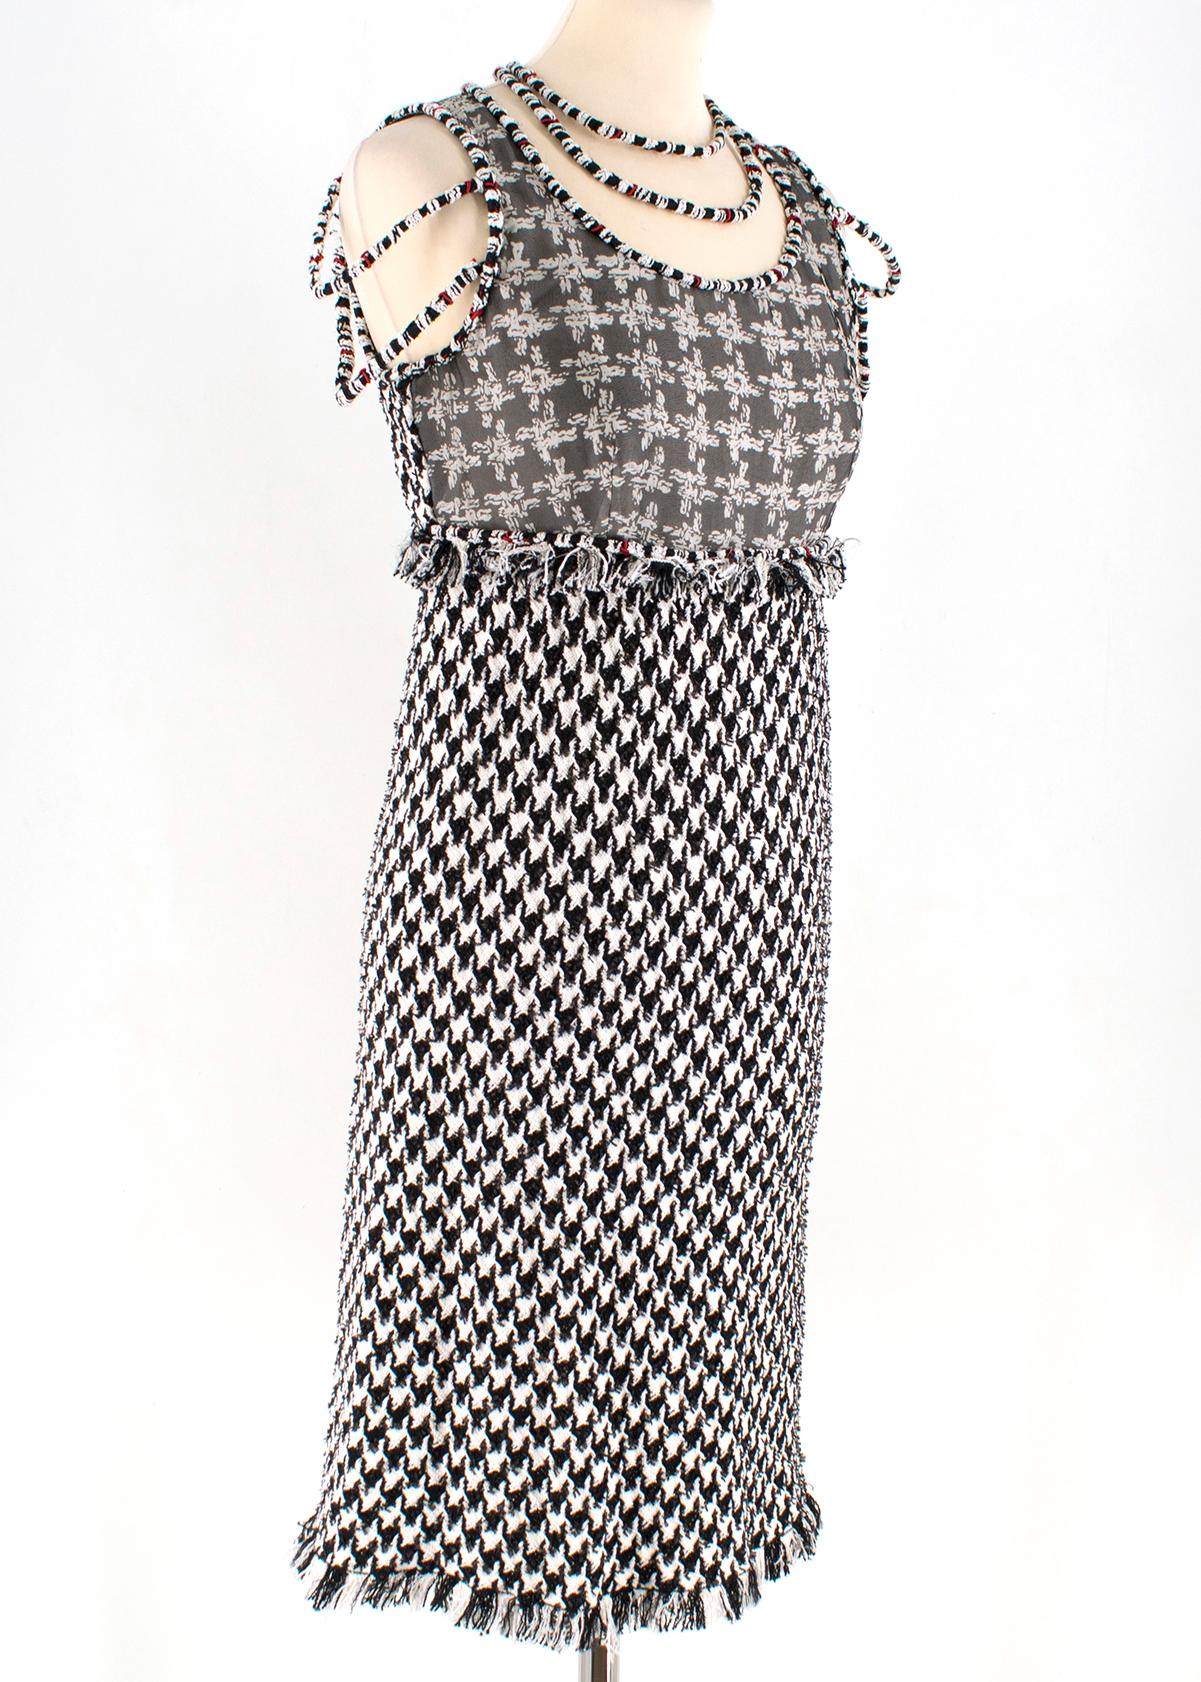 Chanel Black & White Houndstooth Tweed Dress

- Black and white houndstooth with red and gold detailing. 
- Classic Chanel tweed tunic style.
- Frayed hem detailing at waist and trim.
- Double loop feature falling on sleeves and neckline. 
- Sheer